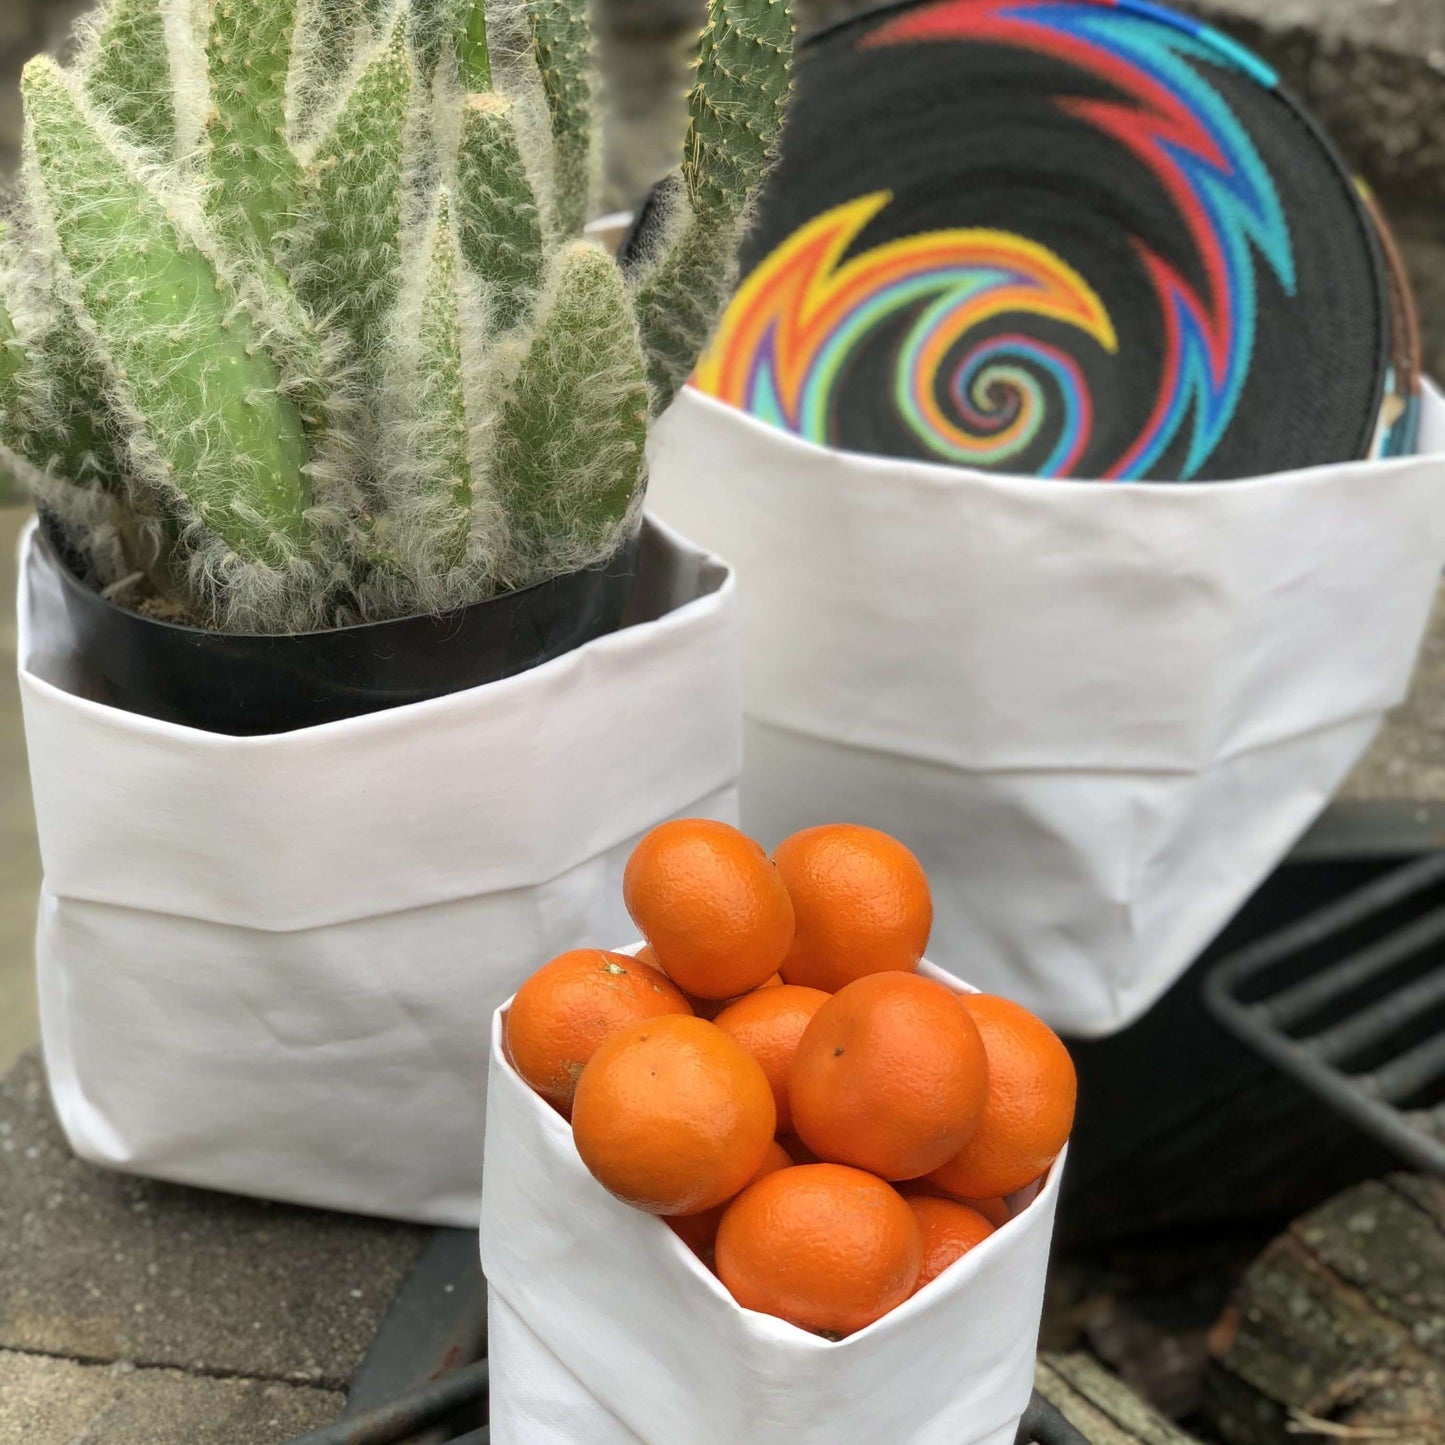 Customizable Washable Paper Sacs for Cactus and Succulents - Great Organizers!